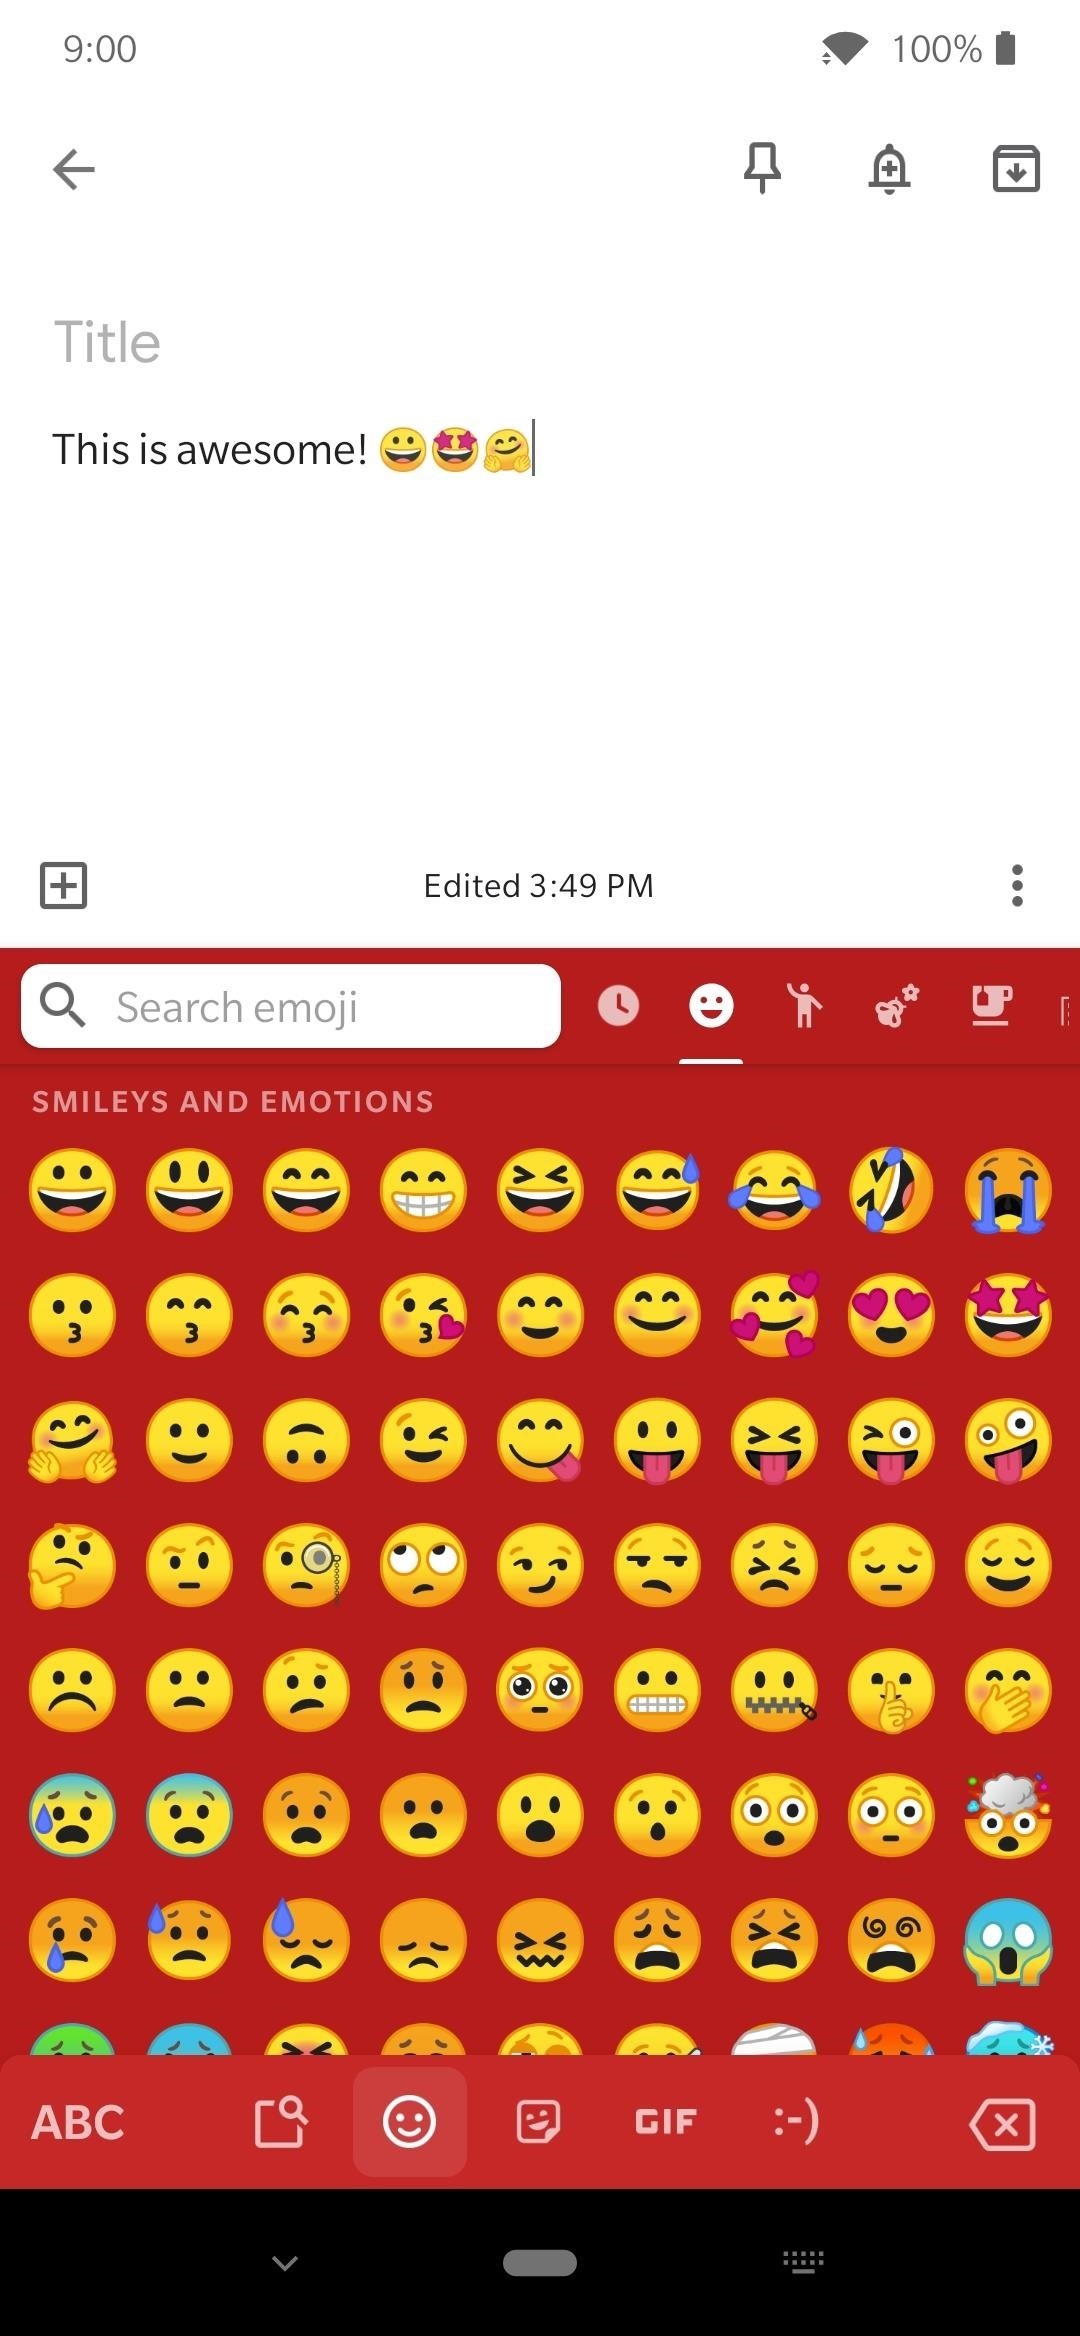 How to Get Twitter's Emojis on Any Android Phone